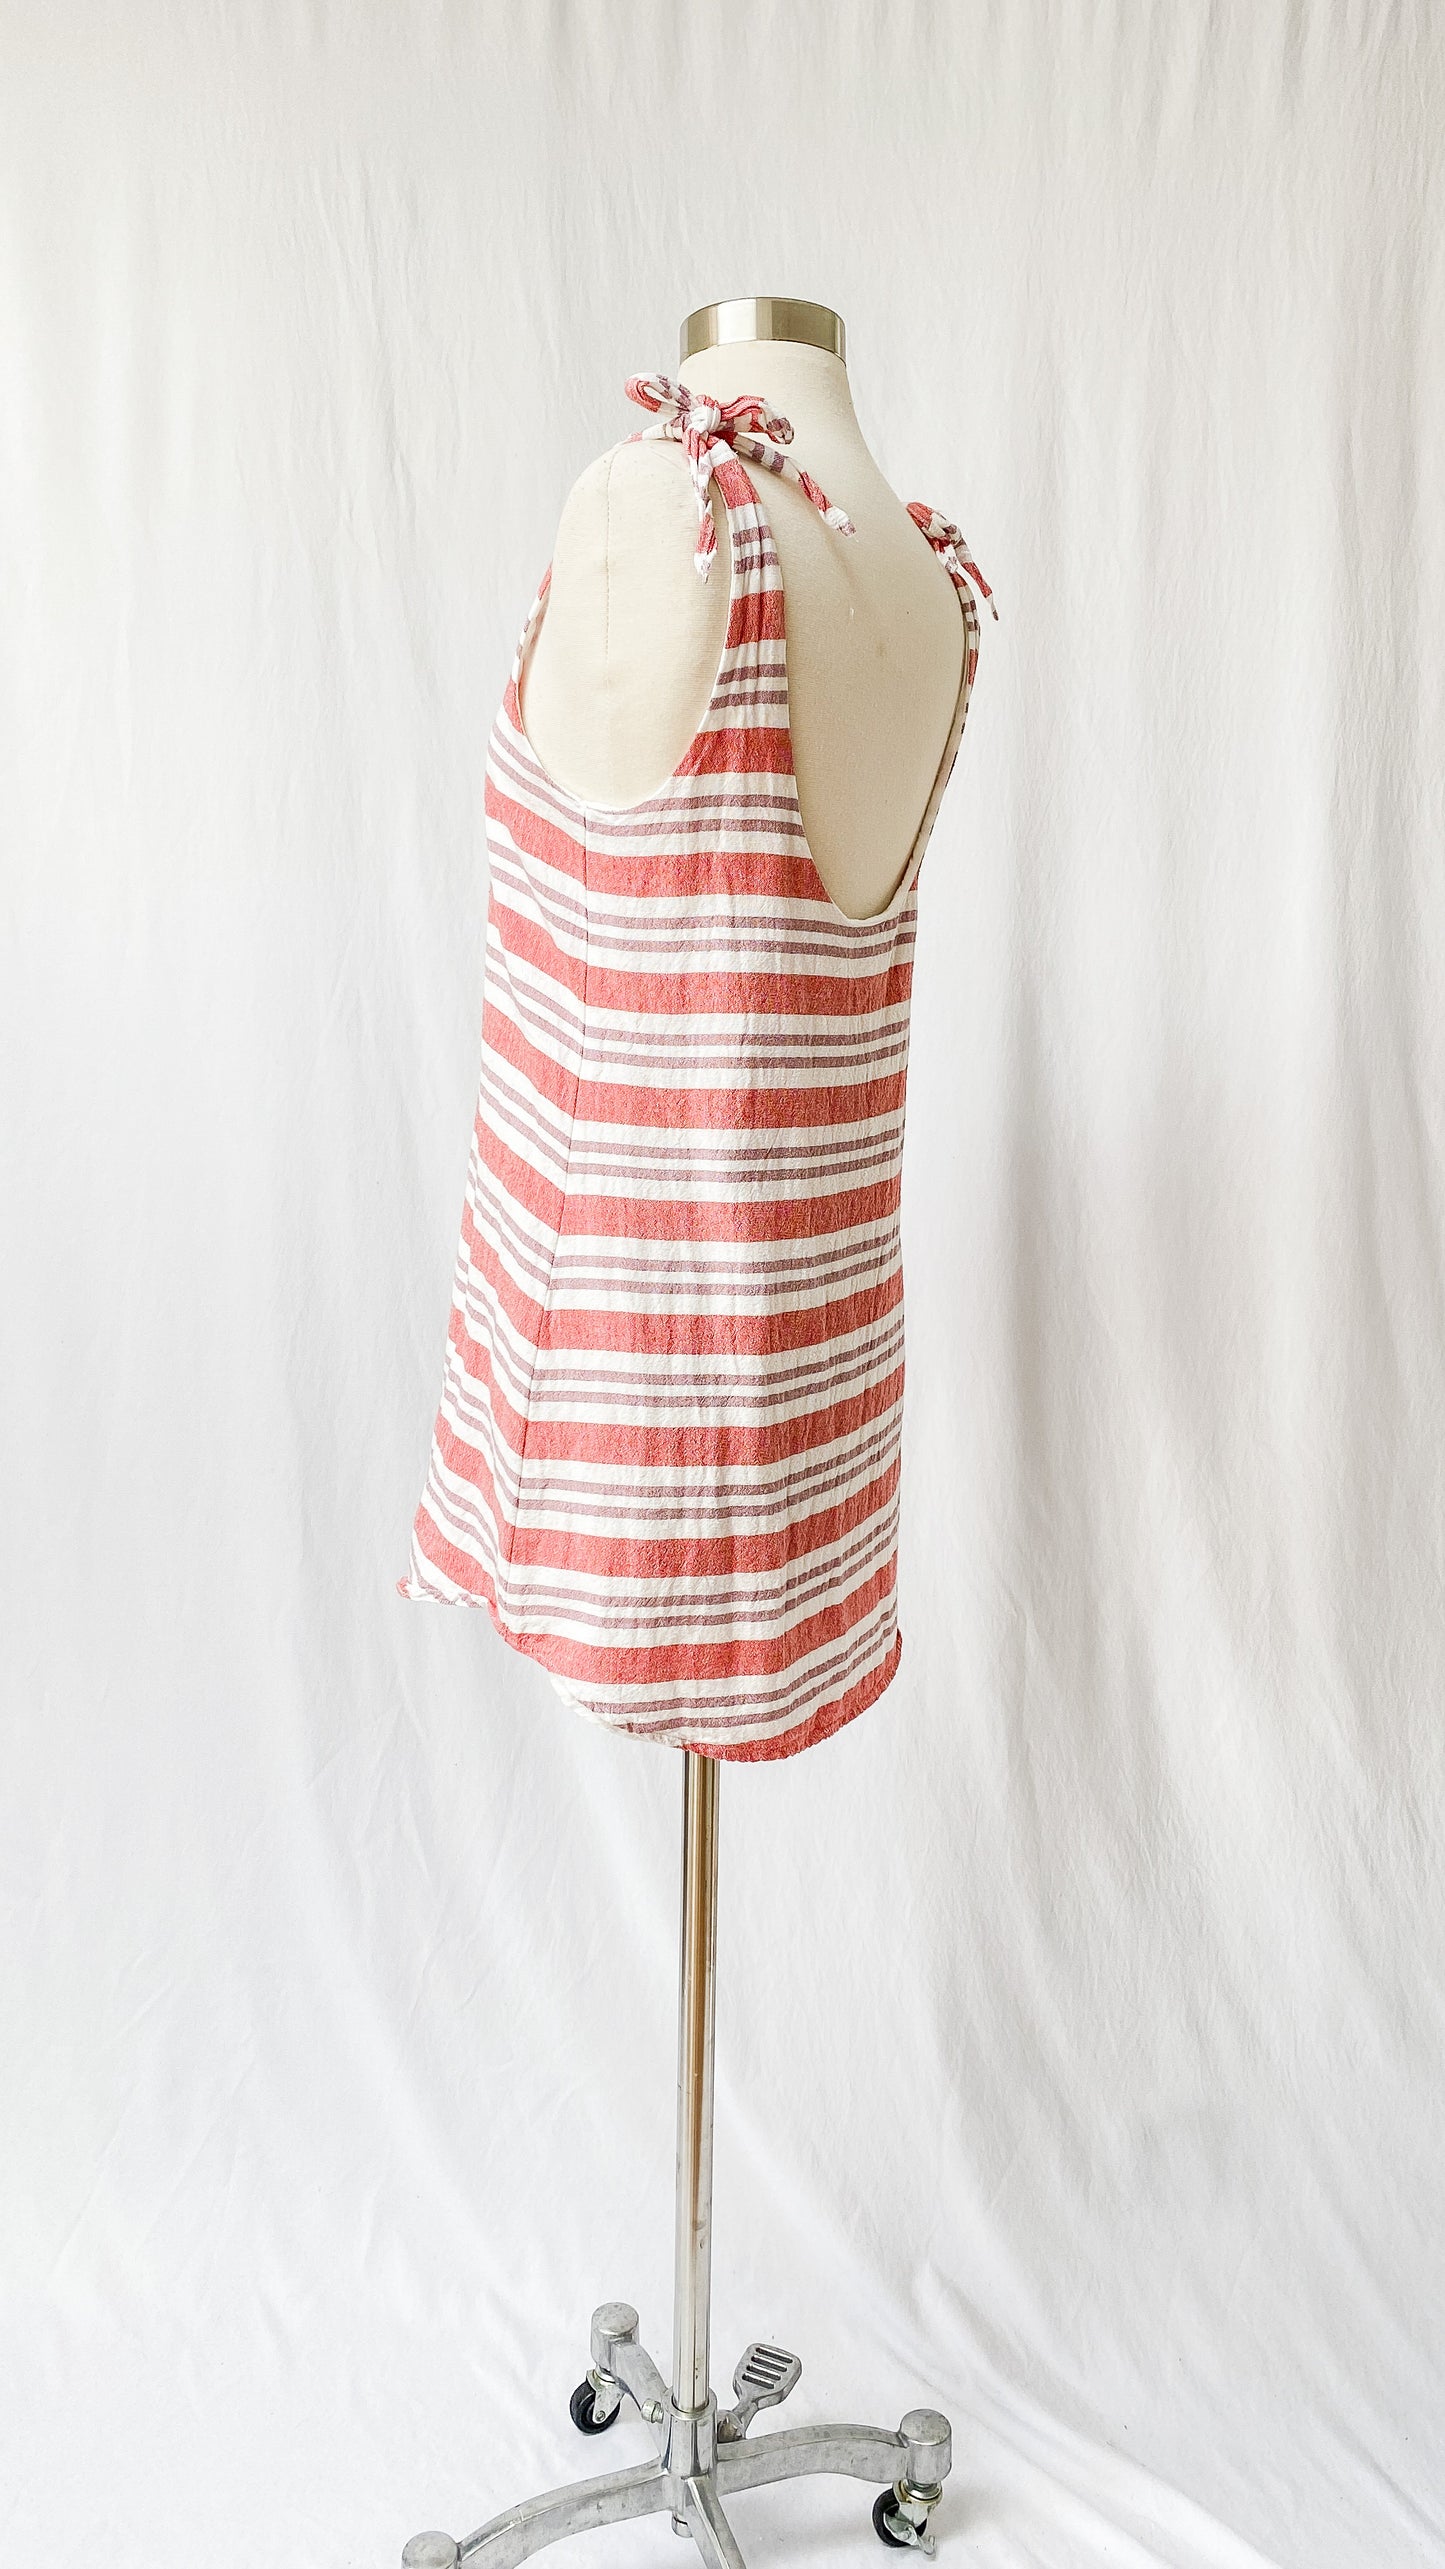 Lovers & Friends Summer Stripe Cover Up Tunic (S)